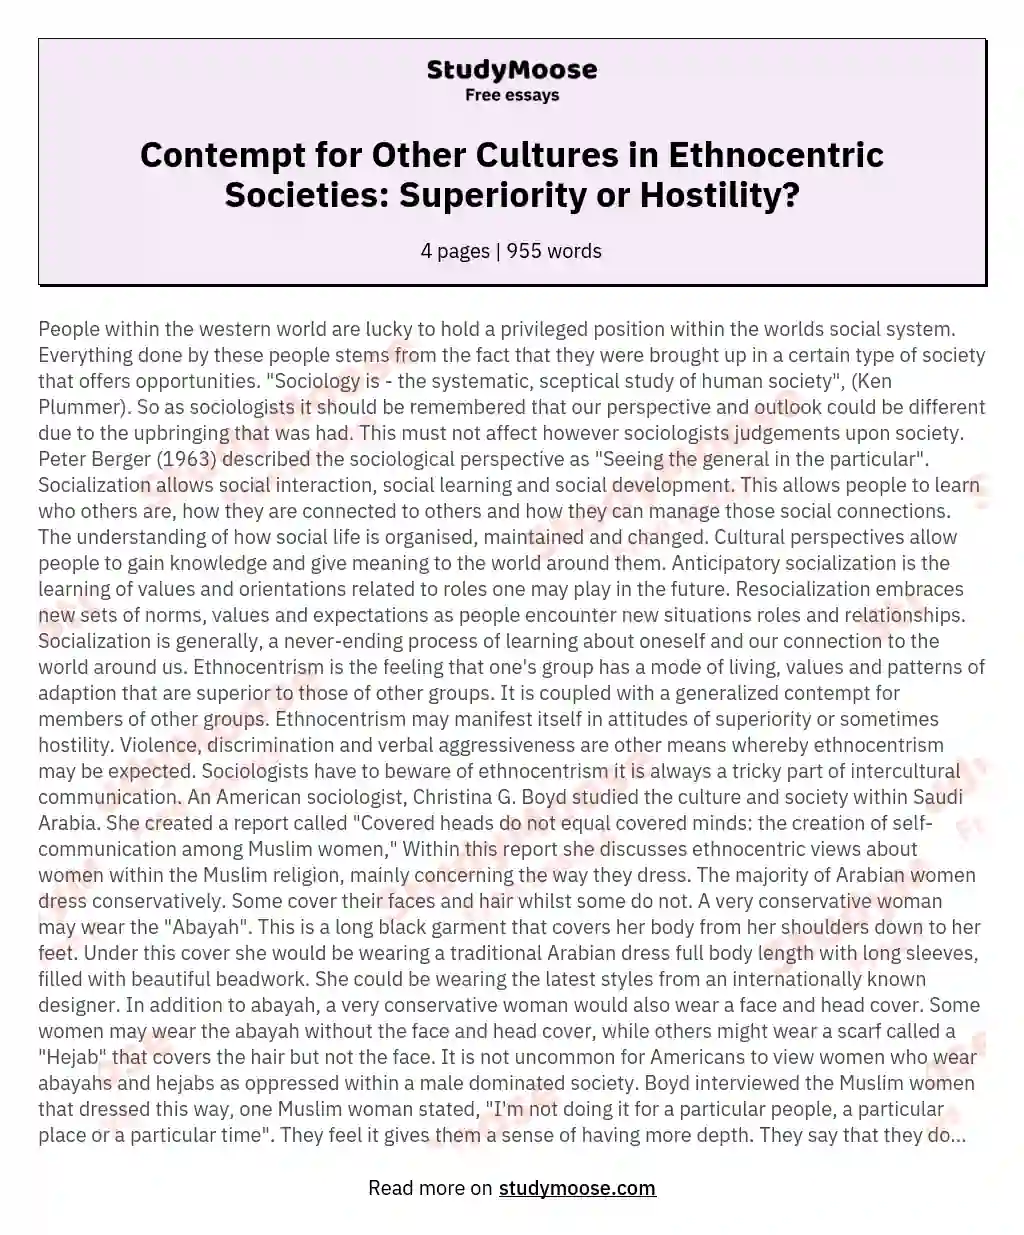 Contempt for Other Cultures in Ethnocentric Societies: Superiority or Hostility?